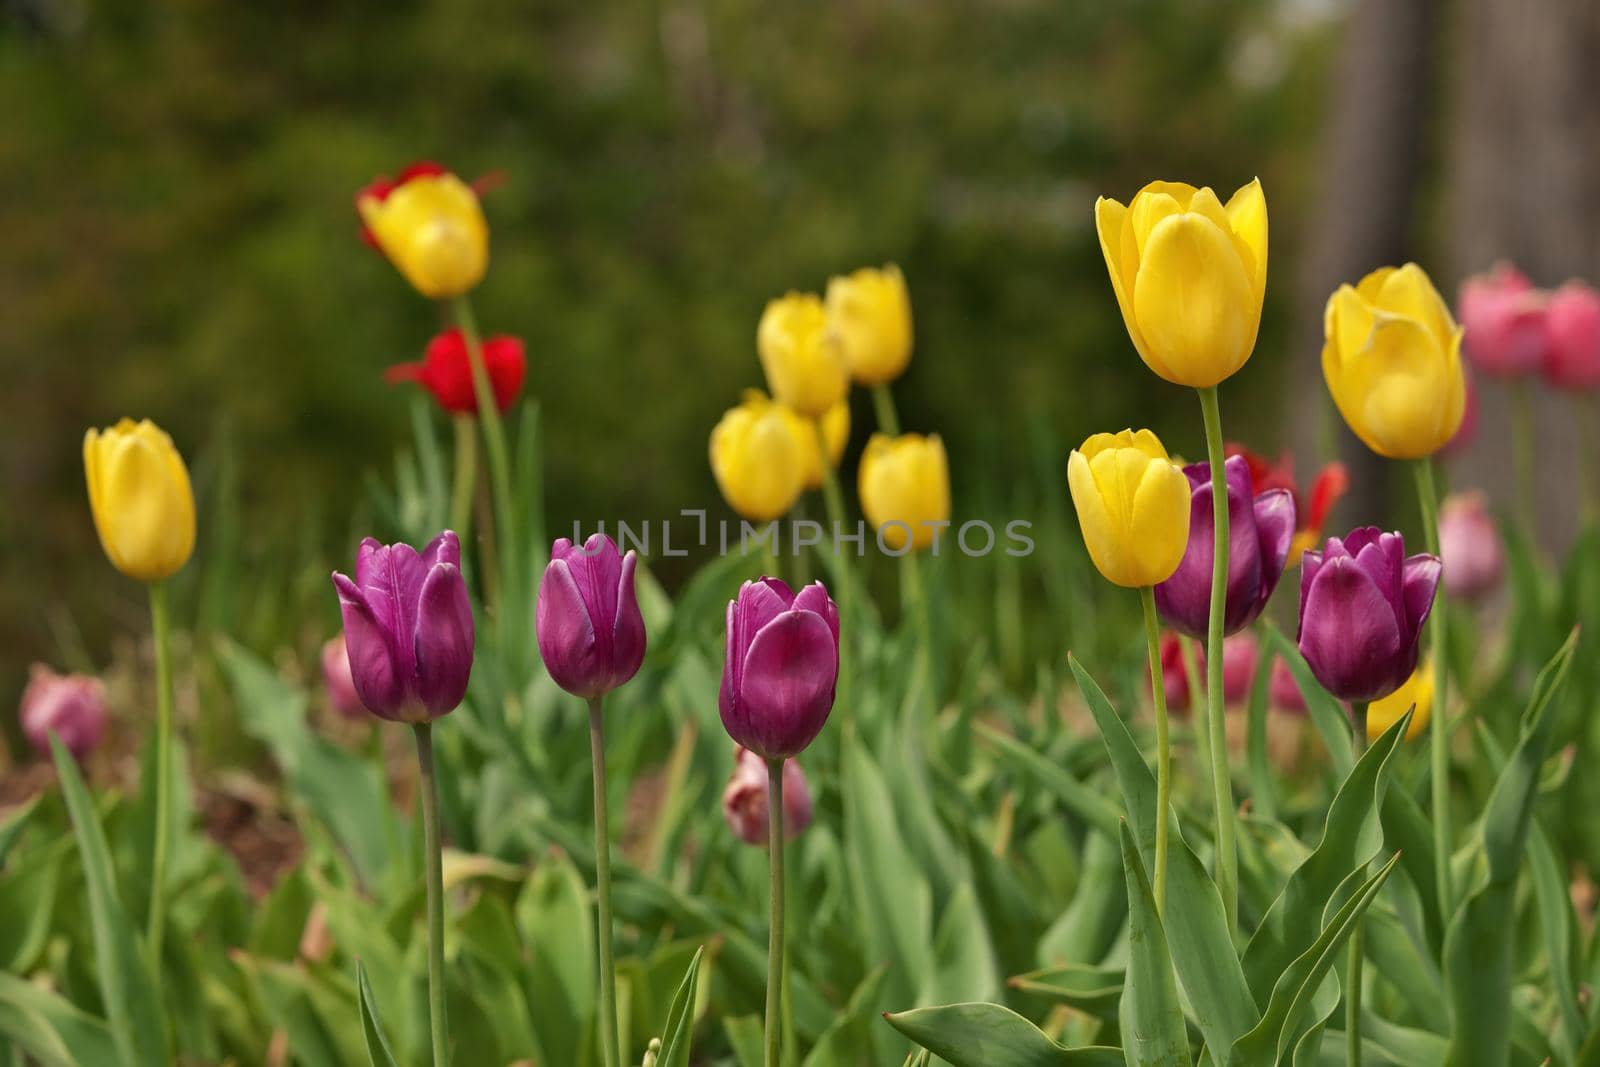 Multi Colored Tulips With Shallow Depth of Field and Creamy Bokeh Background by markvandam